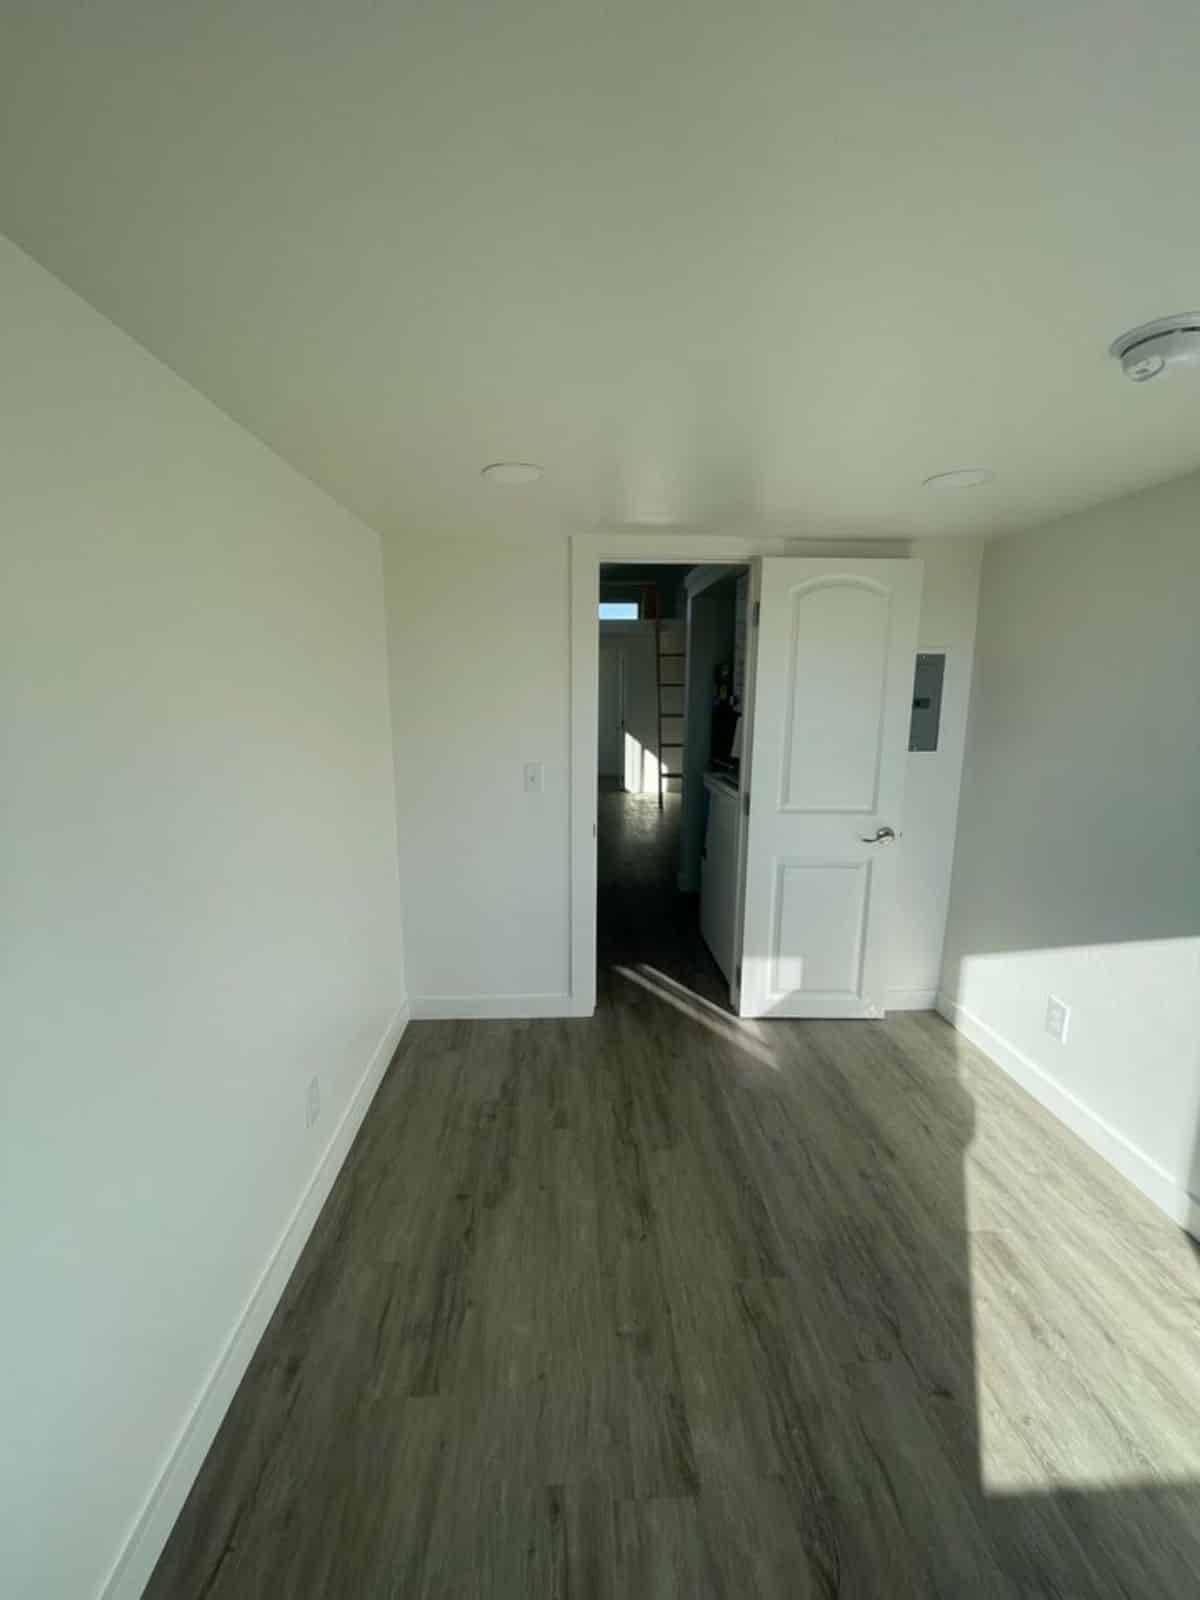 Wooden gray flooring all over the house